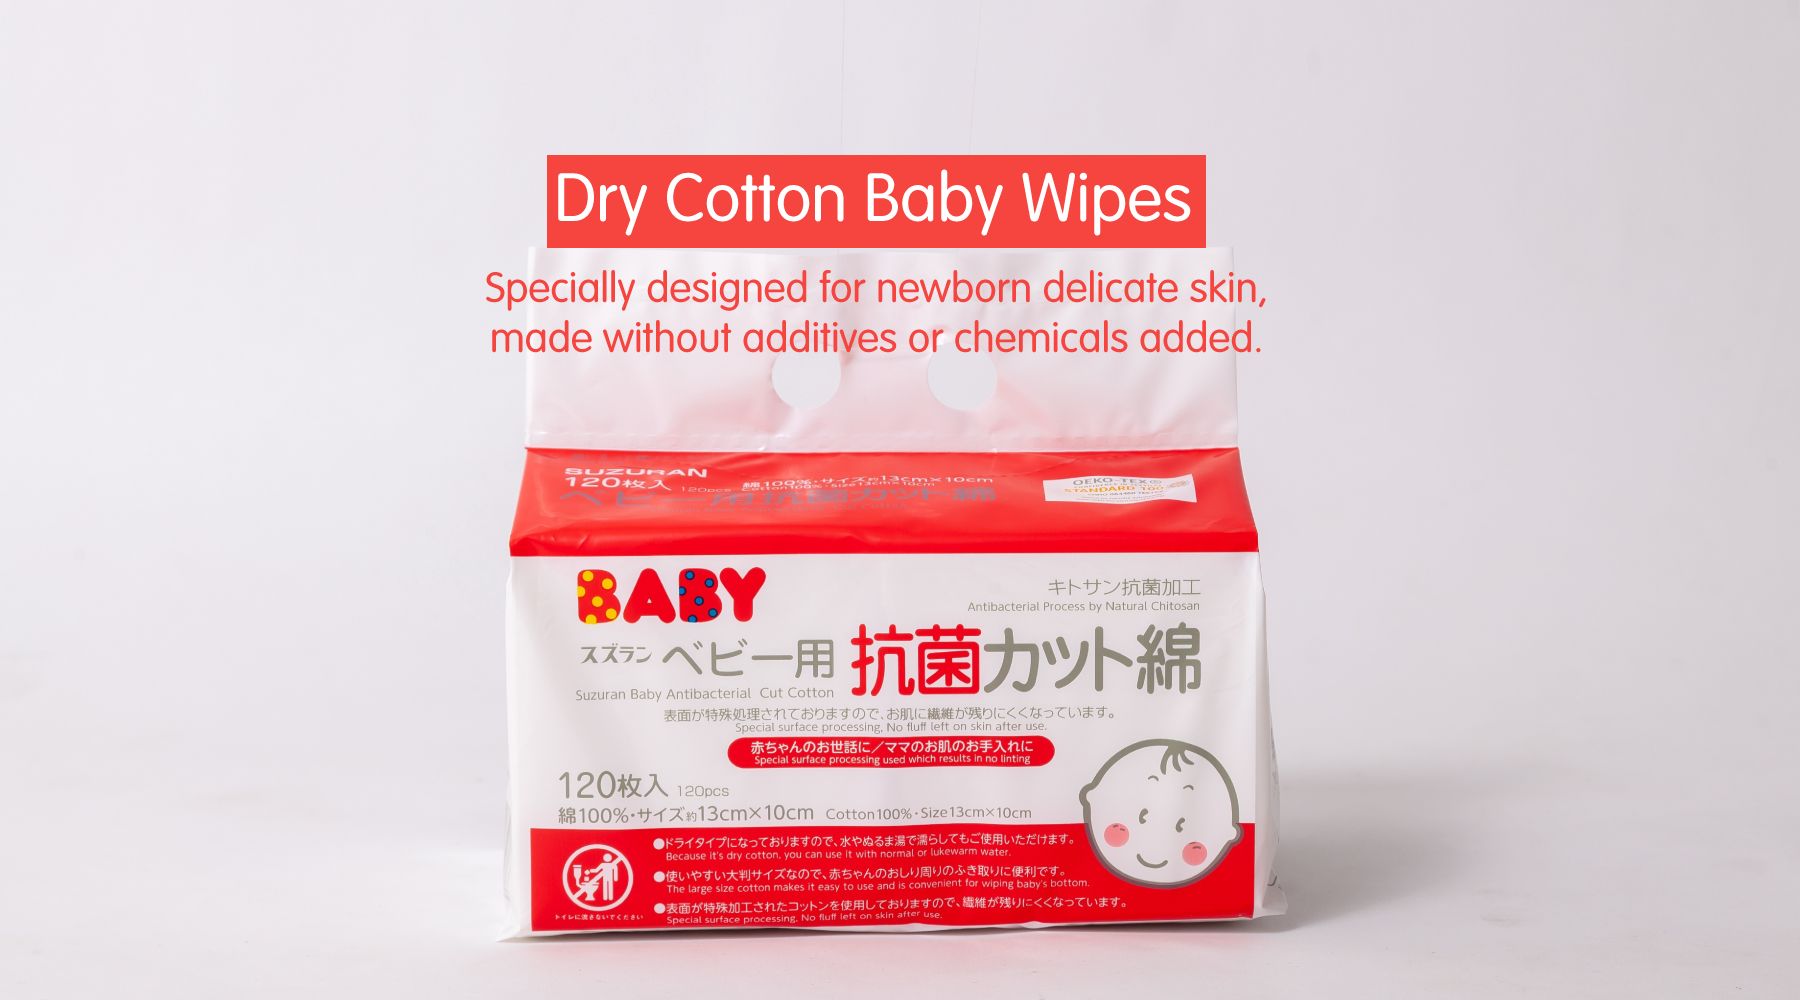 9 Reasons Why You Should Use Dry Cotton Wipes on Your Newborn